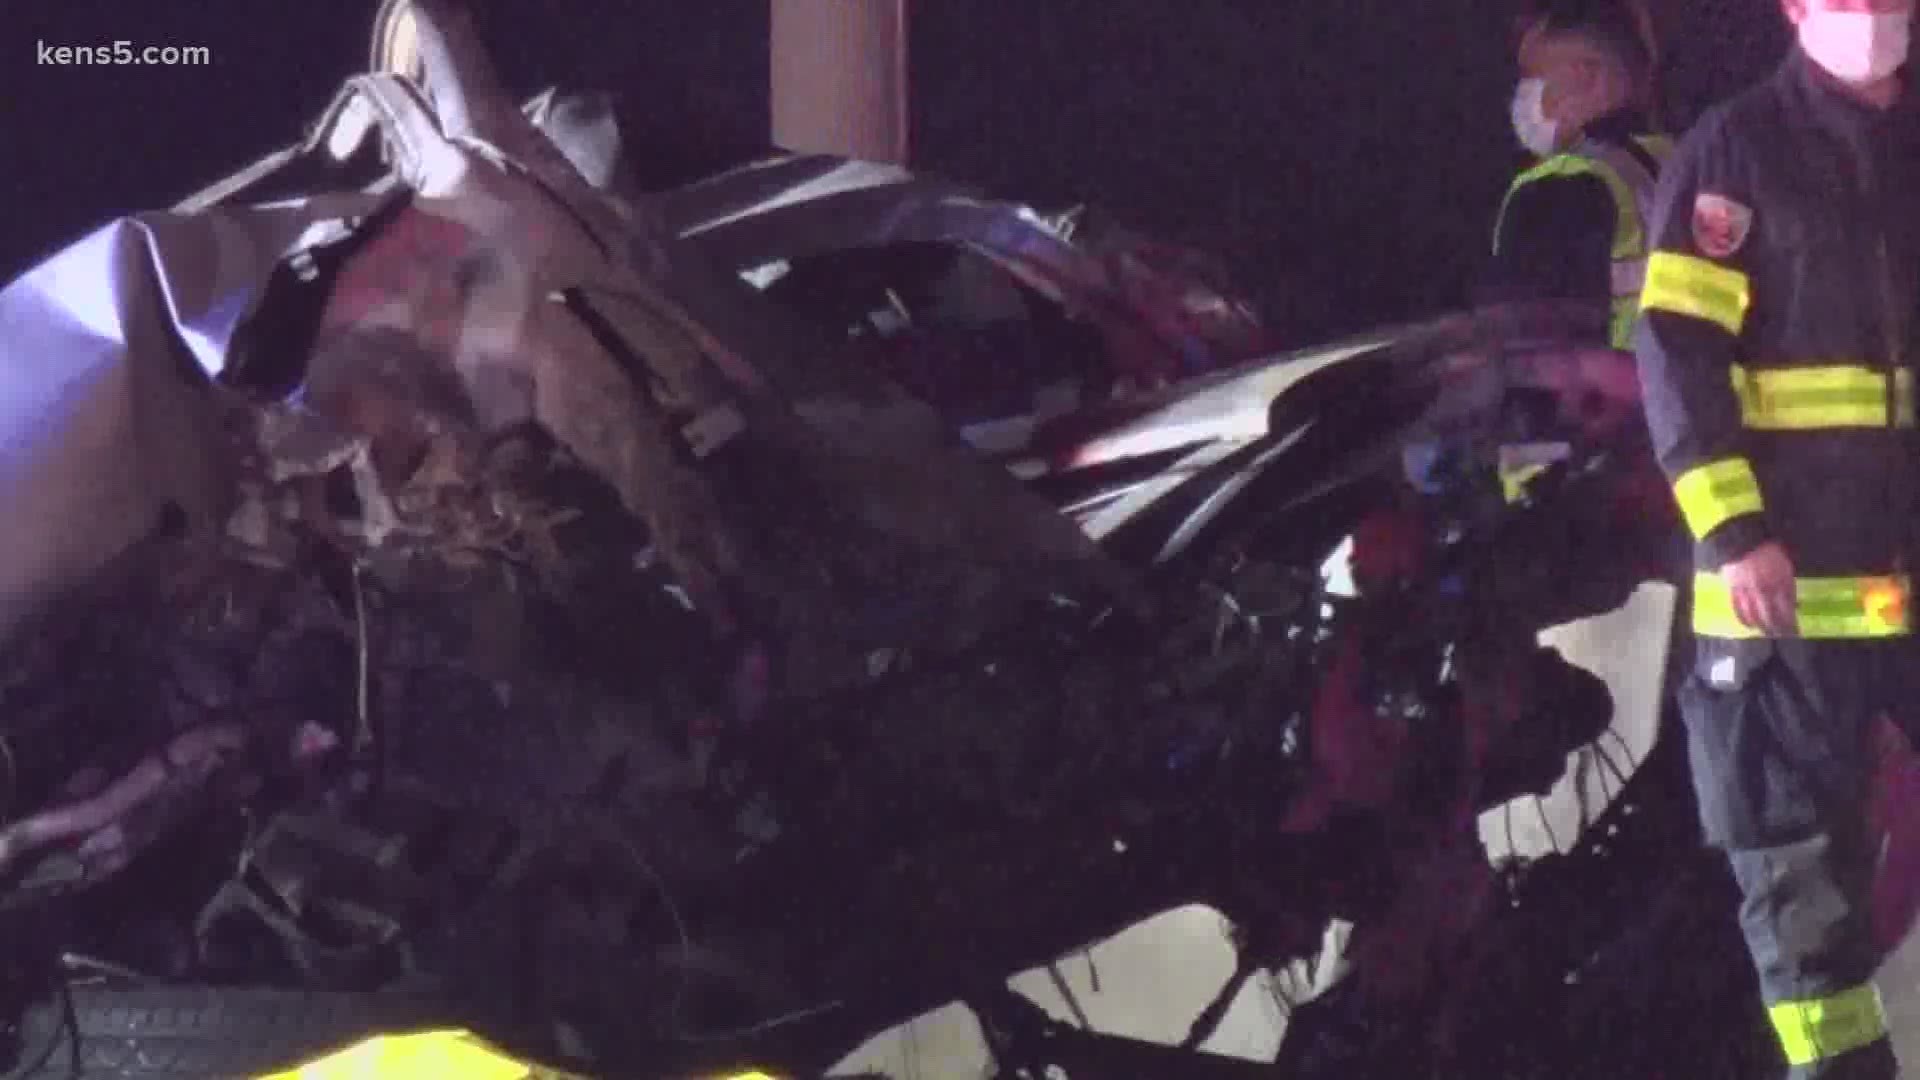 A wrong-way driver crashed head-on into a semi-truck along I-10 near La Cantera Parkway; she died at the scene.